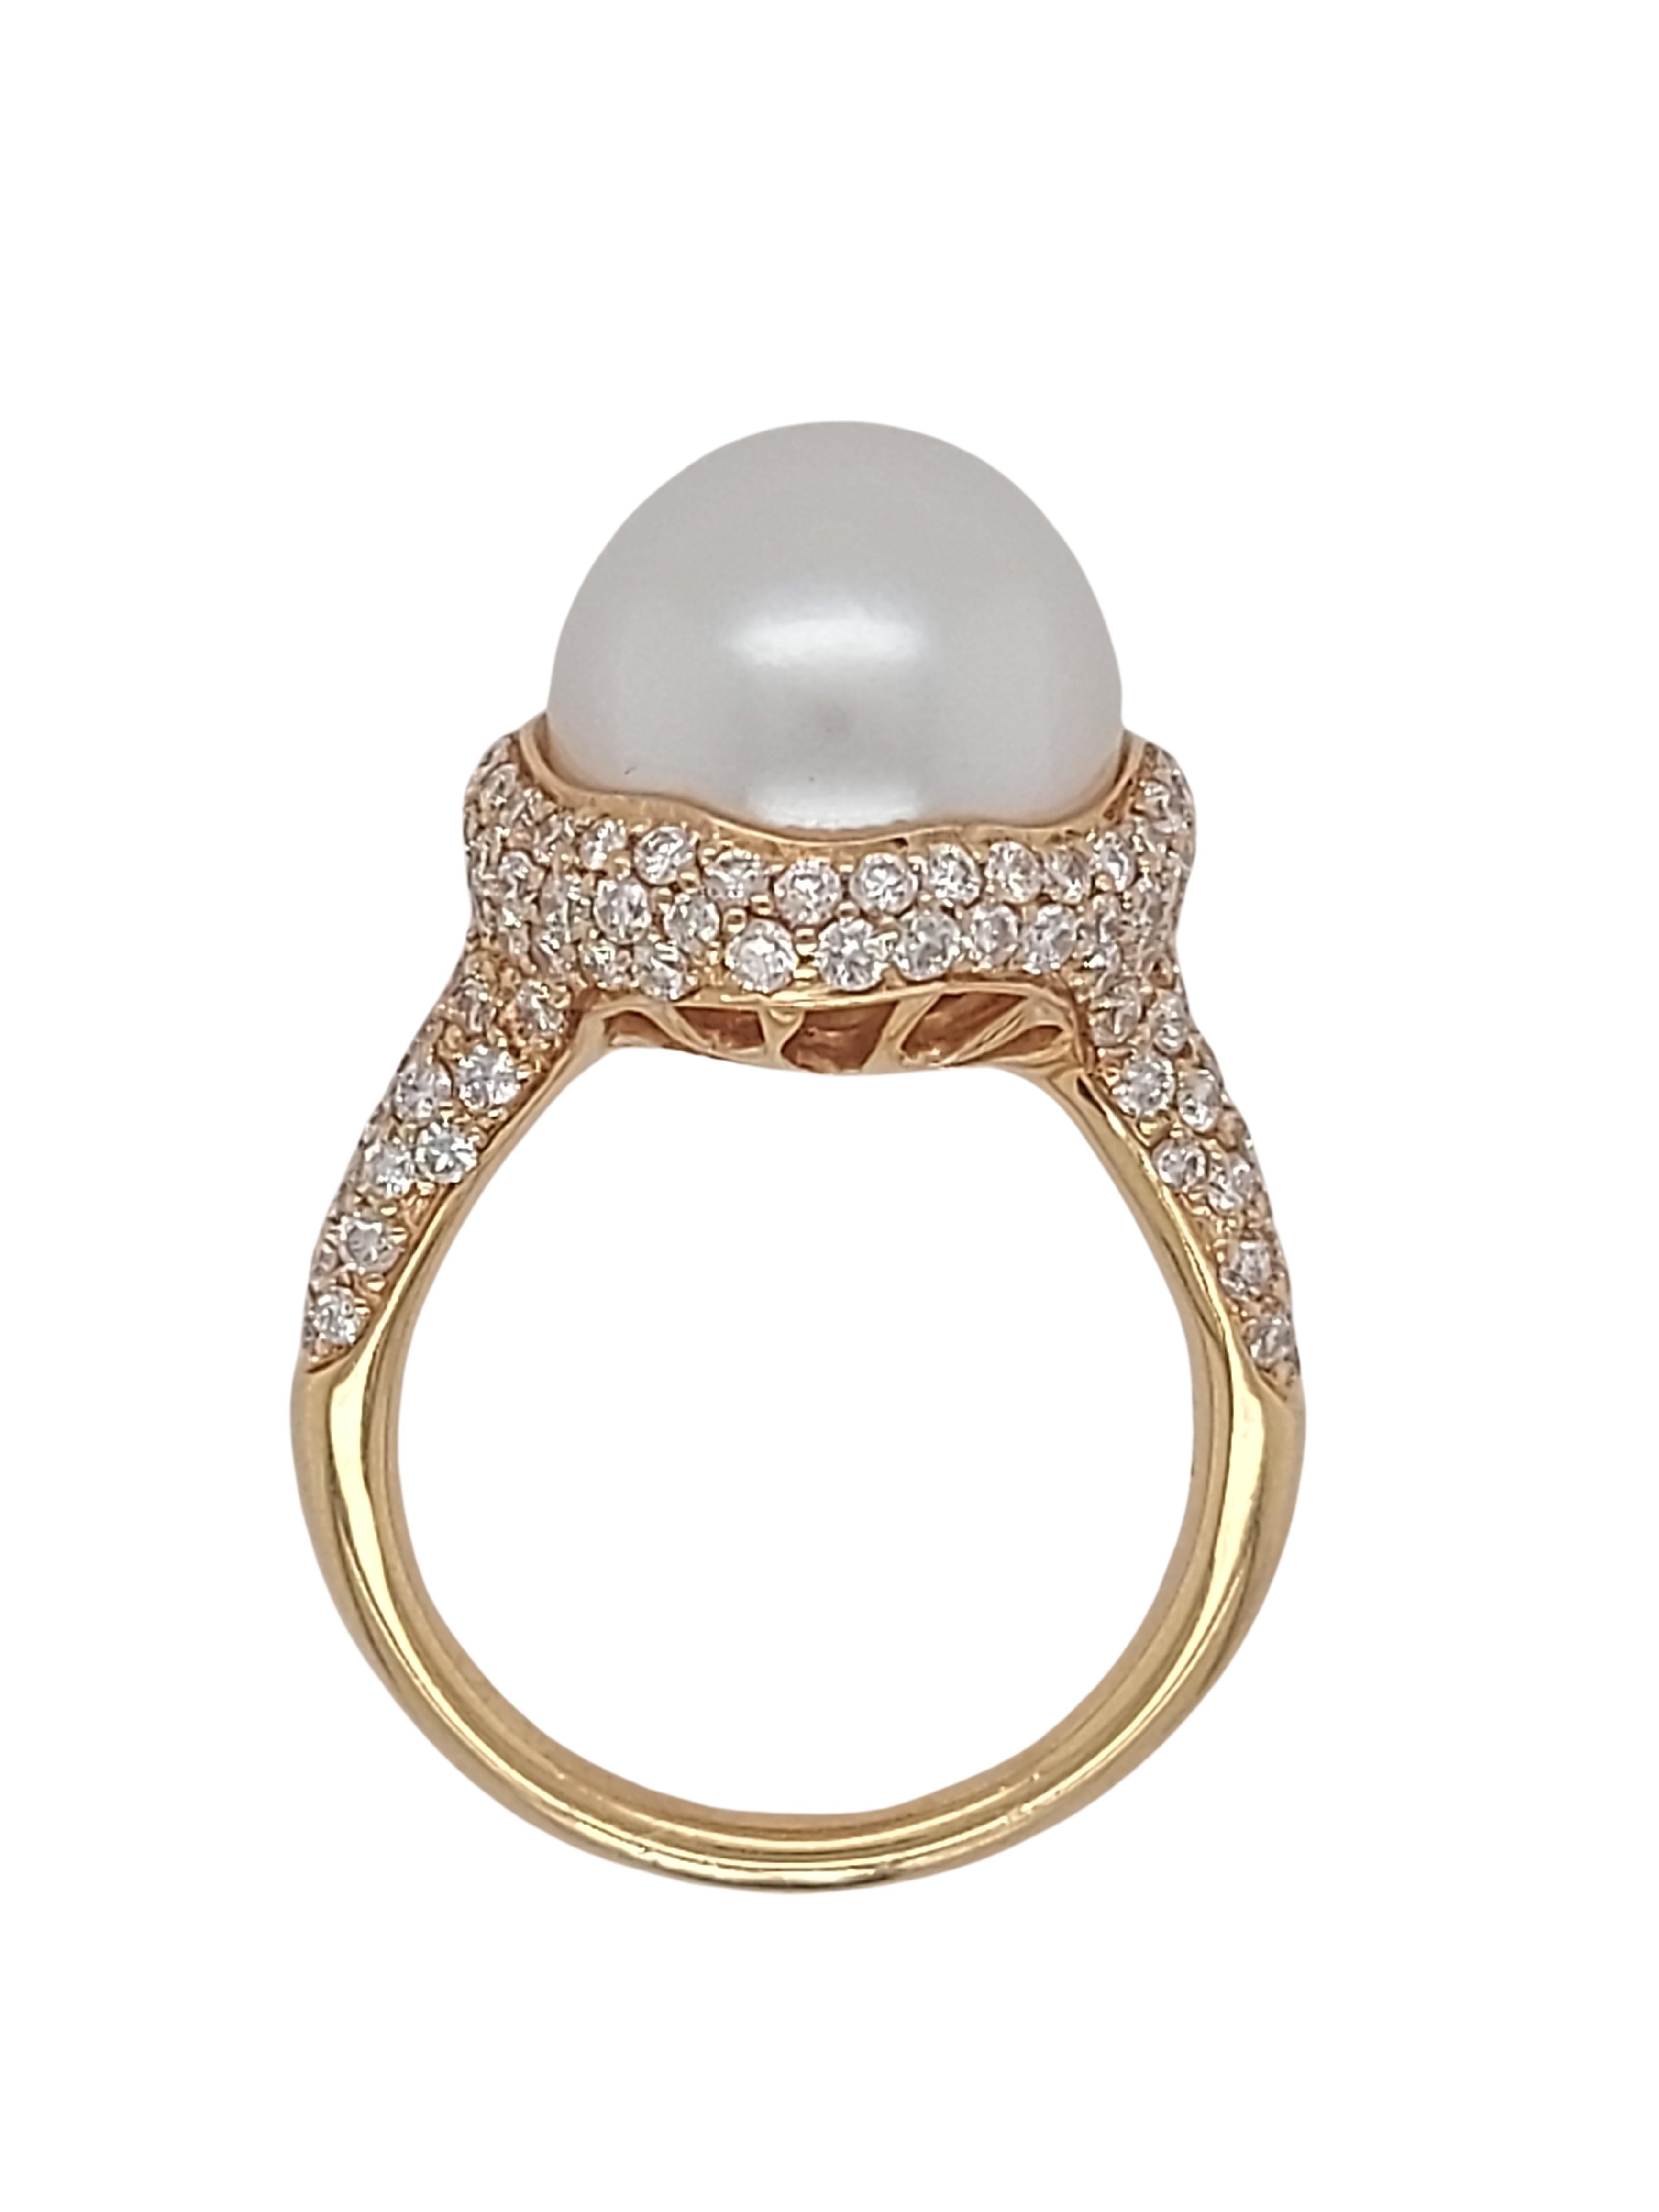 Stunning 18kt Yellow Gold Ring with Pearl & 1.38ct Diamonds For Sale 2